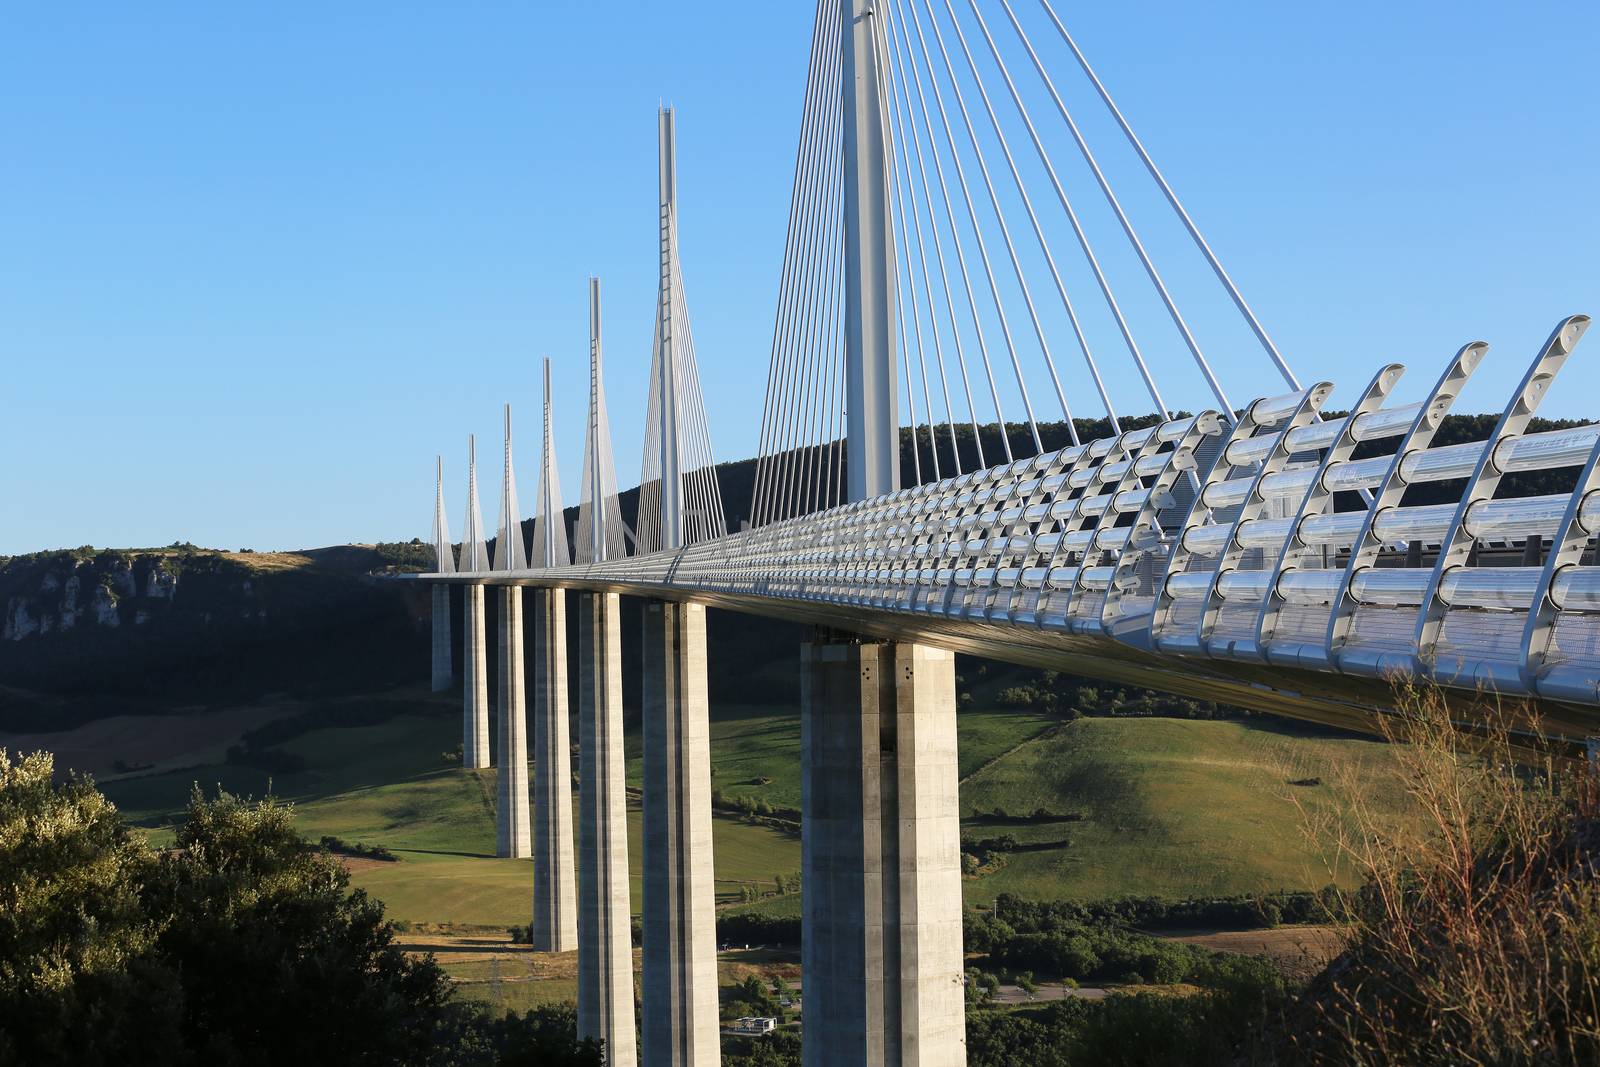 Millau, France - August 21, 2016: The Millau Viaduct Is The Tallest Bridge In The World with One Mast's Summit At 343 Metres Above The Base Of The Structure. Aveyron, Midi Pyrenees, France